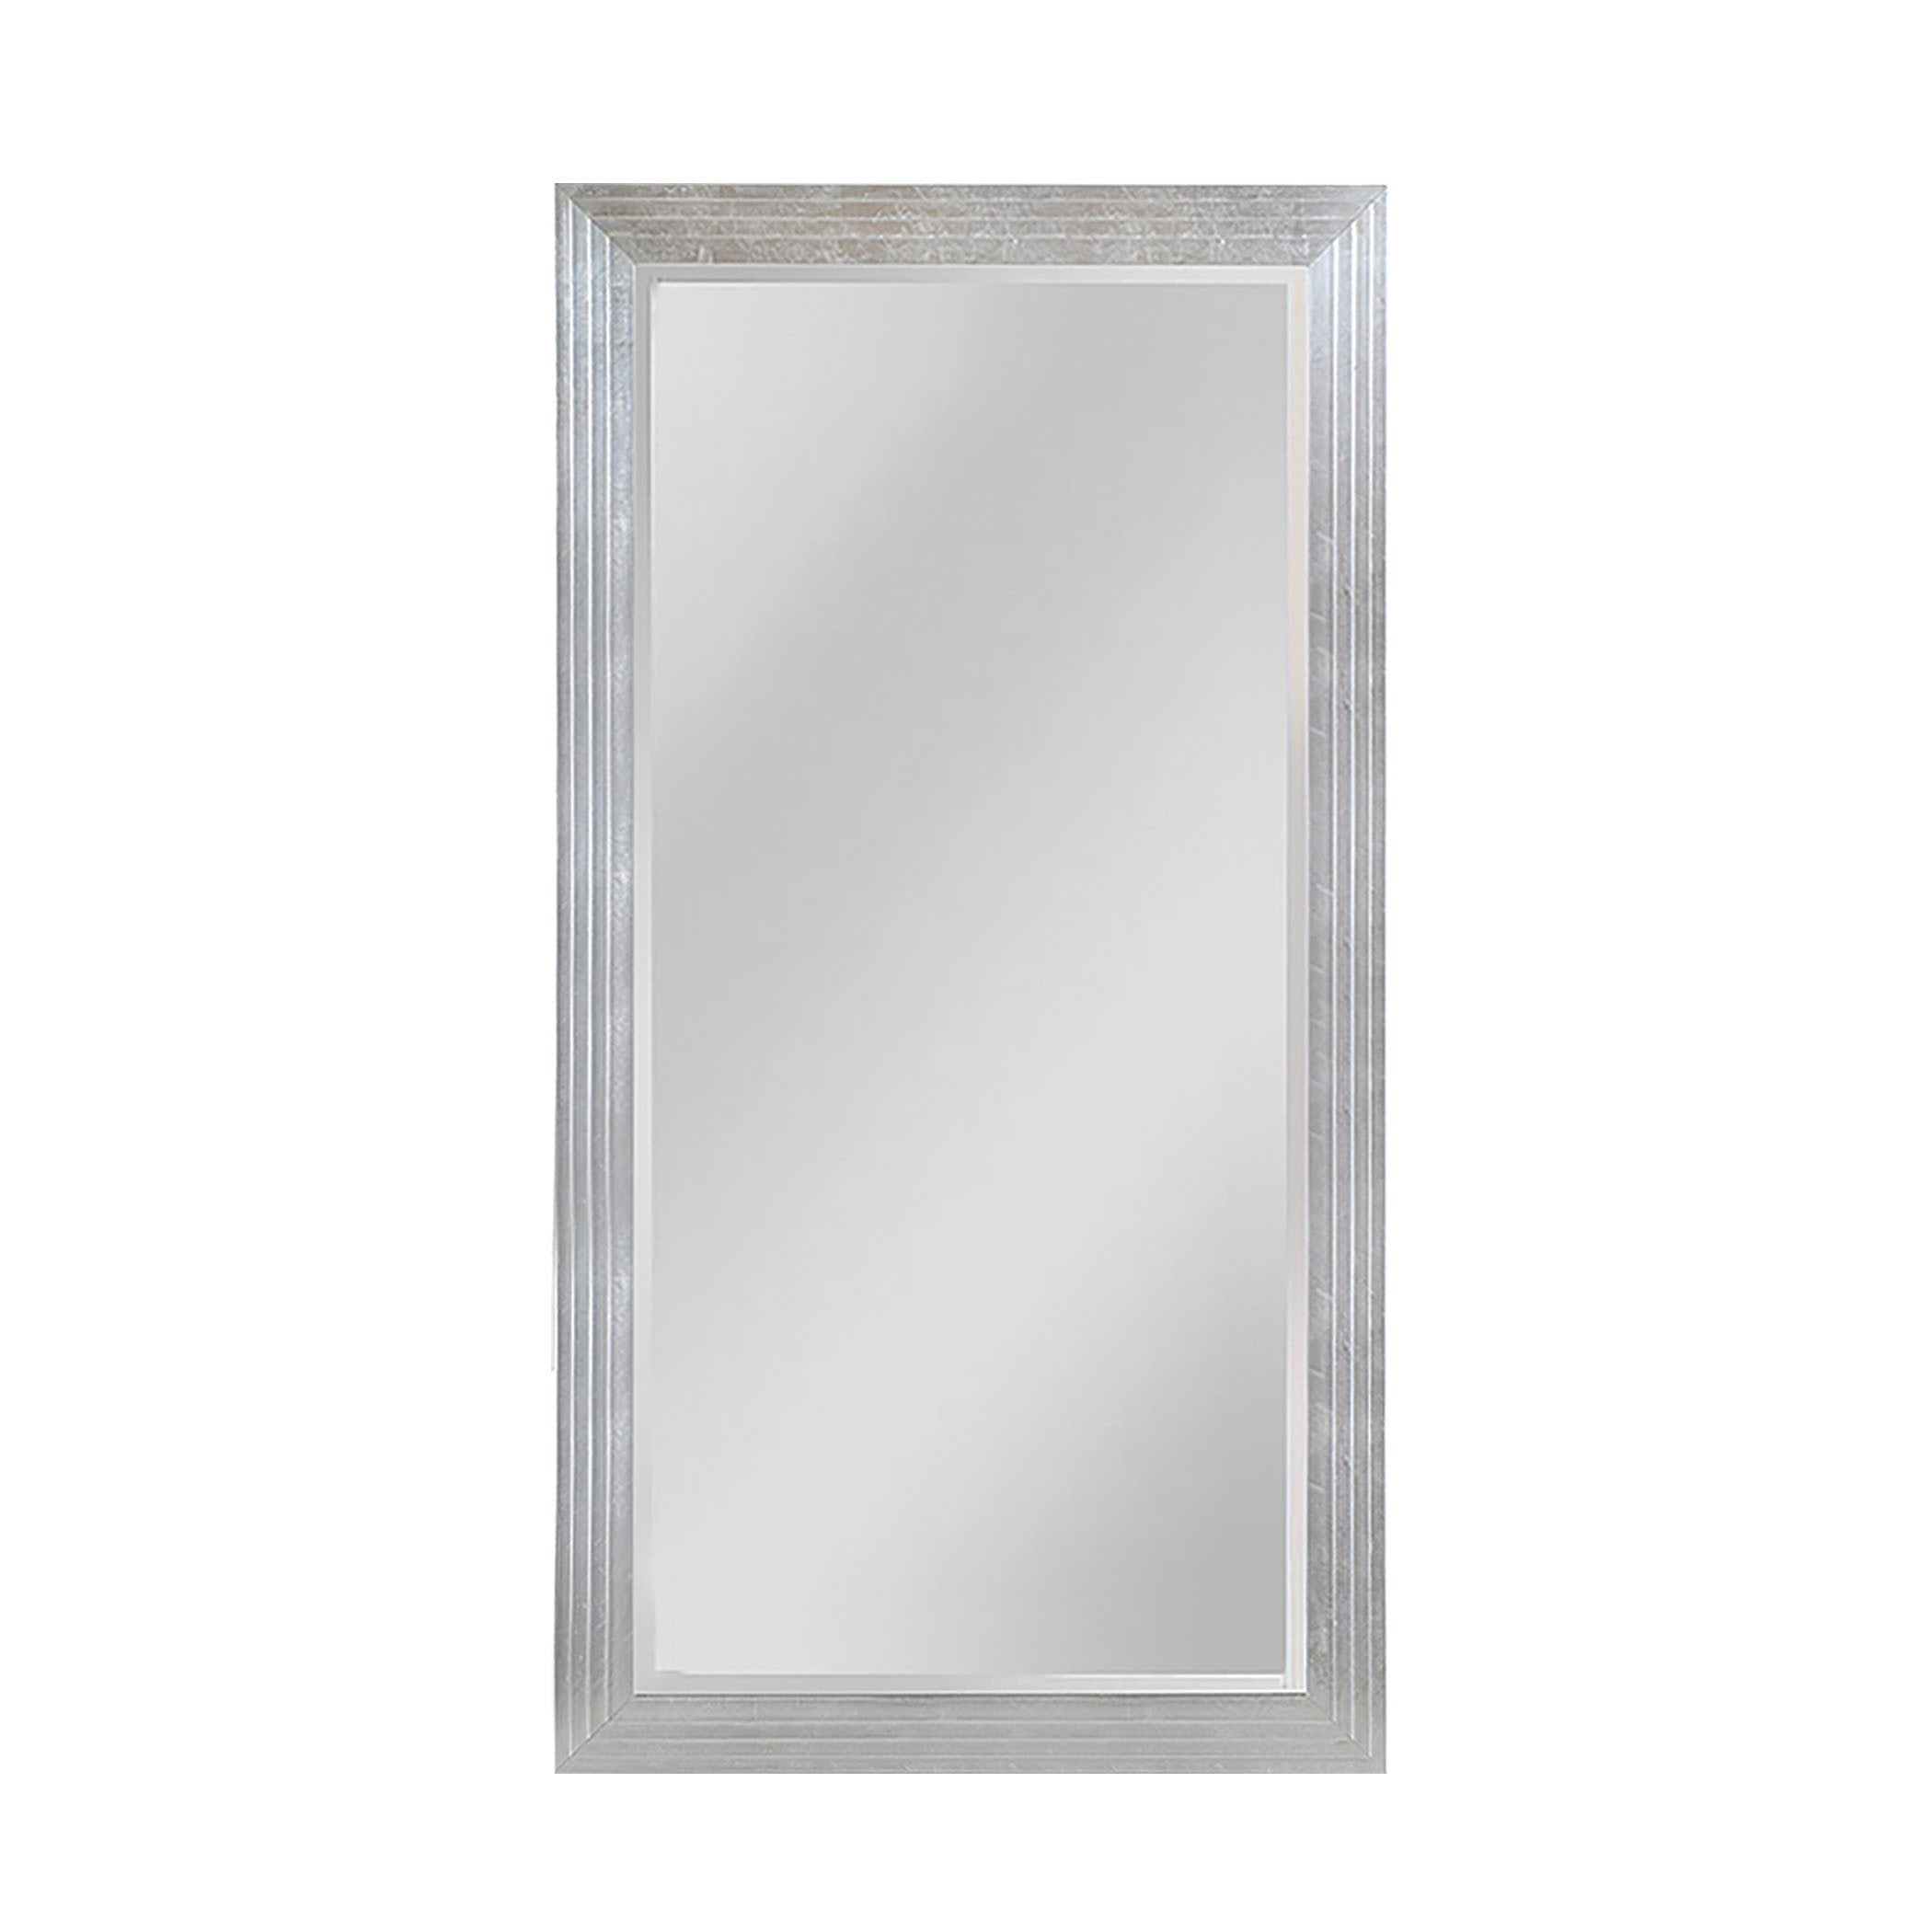 Mirror Masters Mw1110b-0051 Billings Collection Silver Leaf Finish Wall Mirror